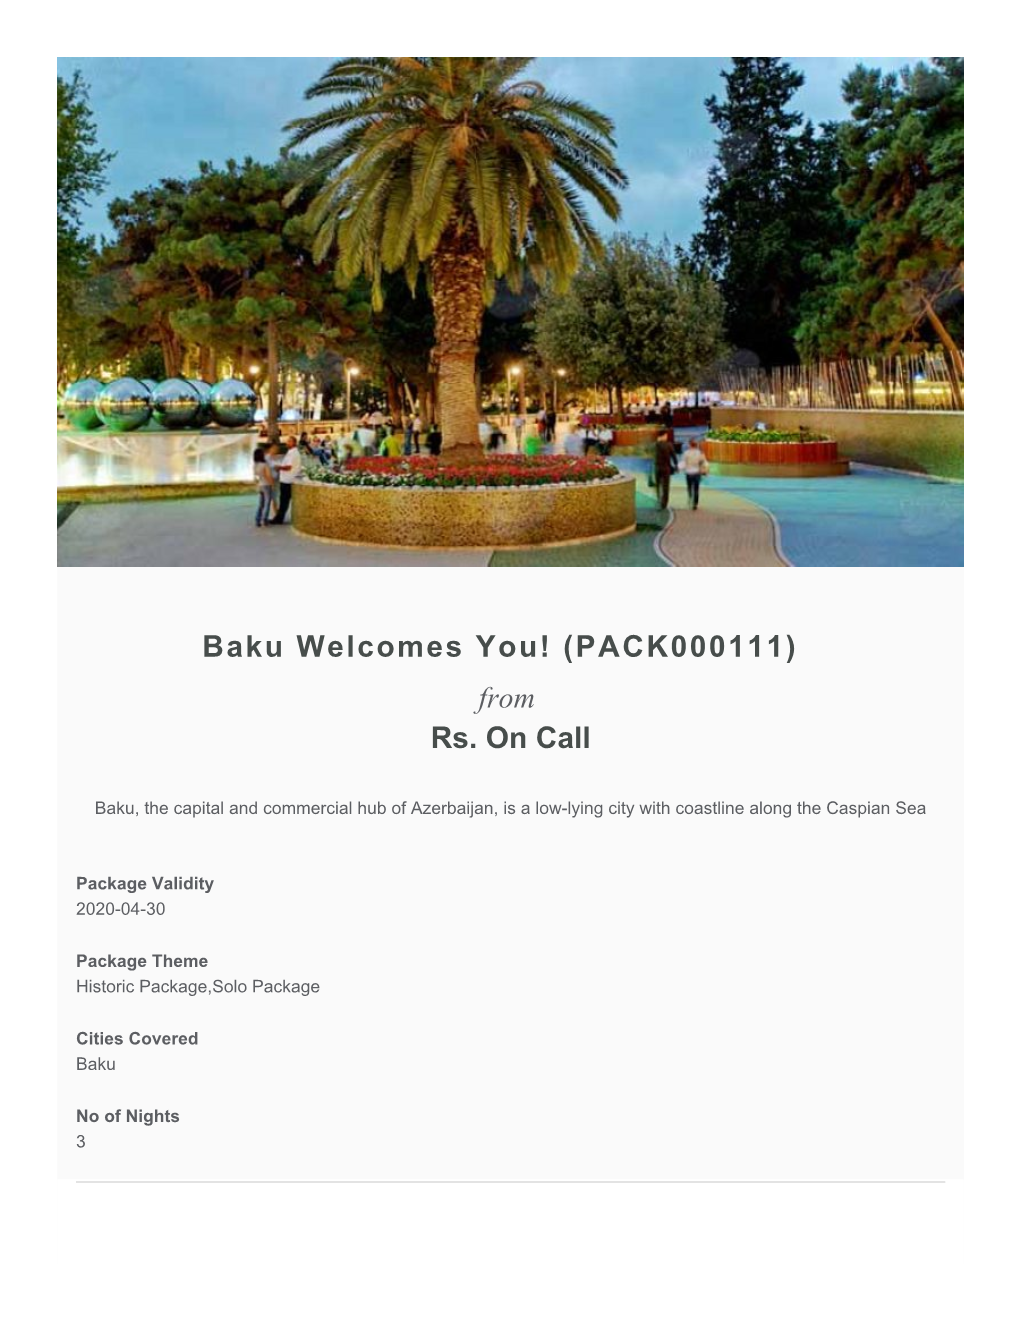 Baku Welcomes You! (PACK000111) from Rs. on Call